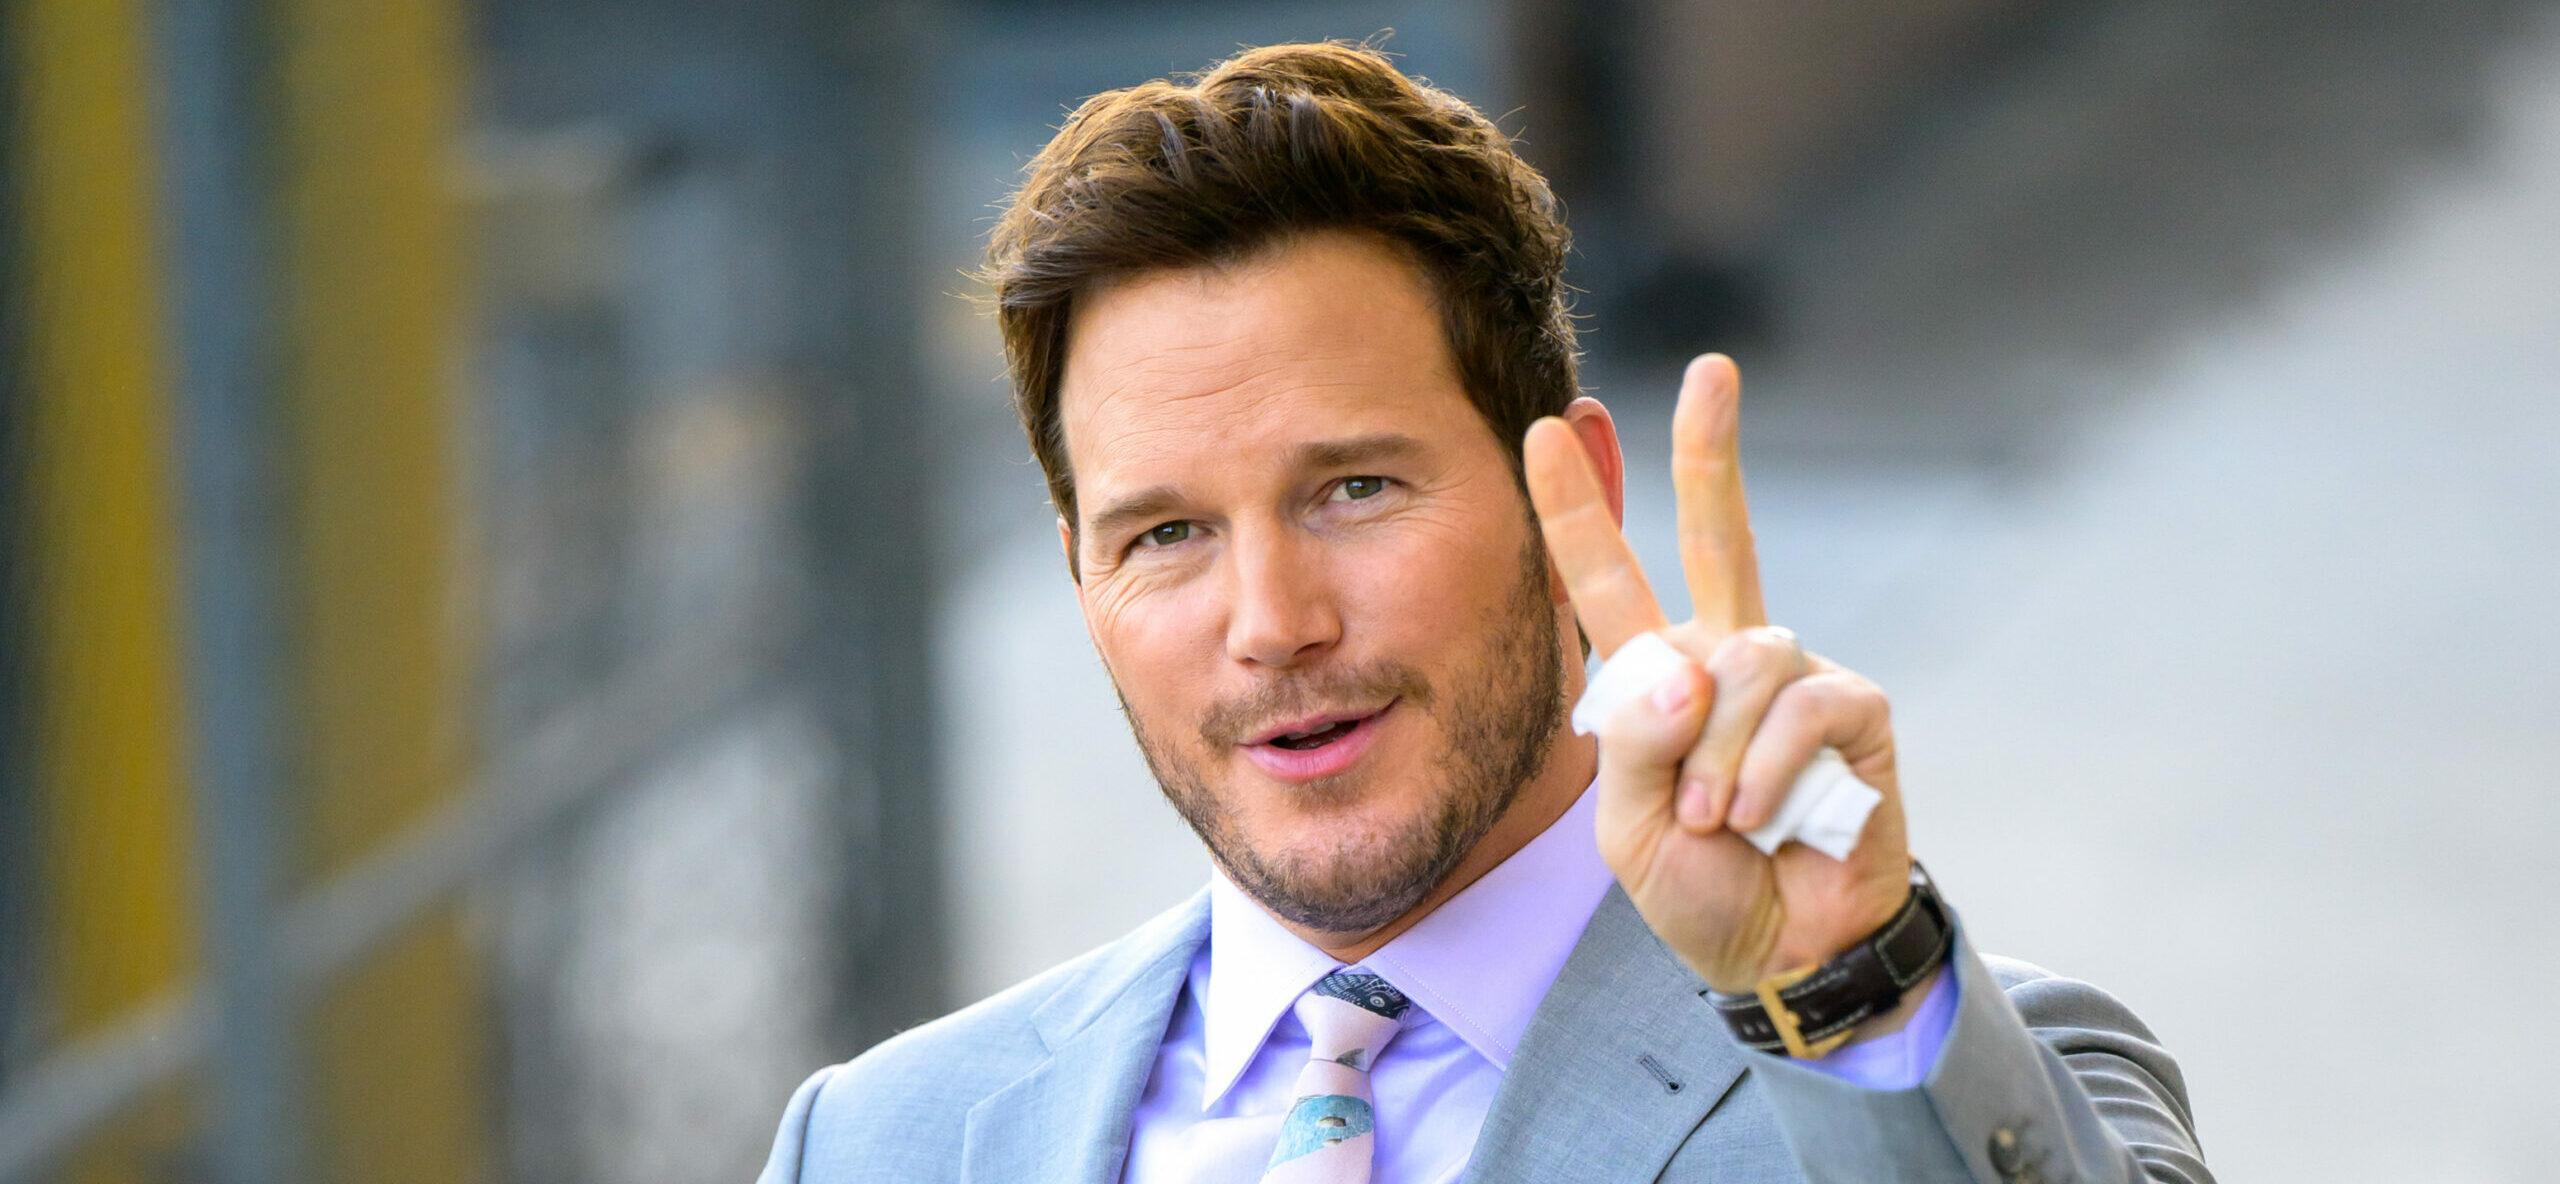 Chris Pratt Addresses Fans Concerns After Receiving Backlash For His Role In ‘The Super Mario Bros. Movie’